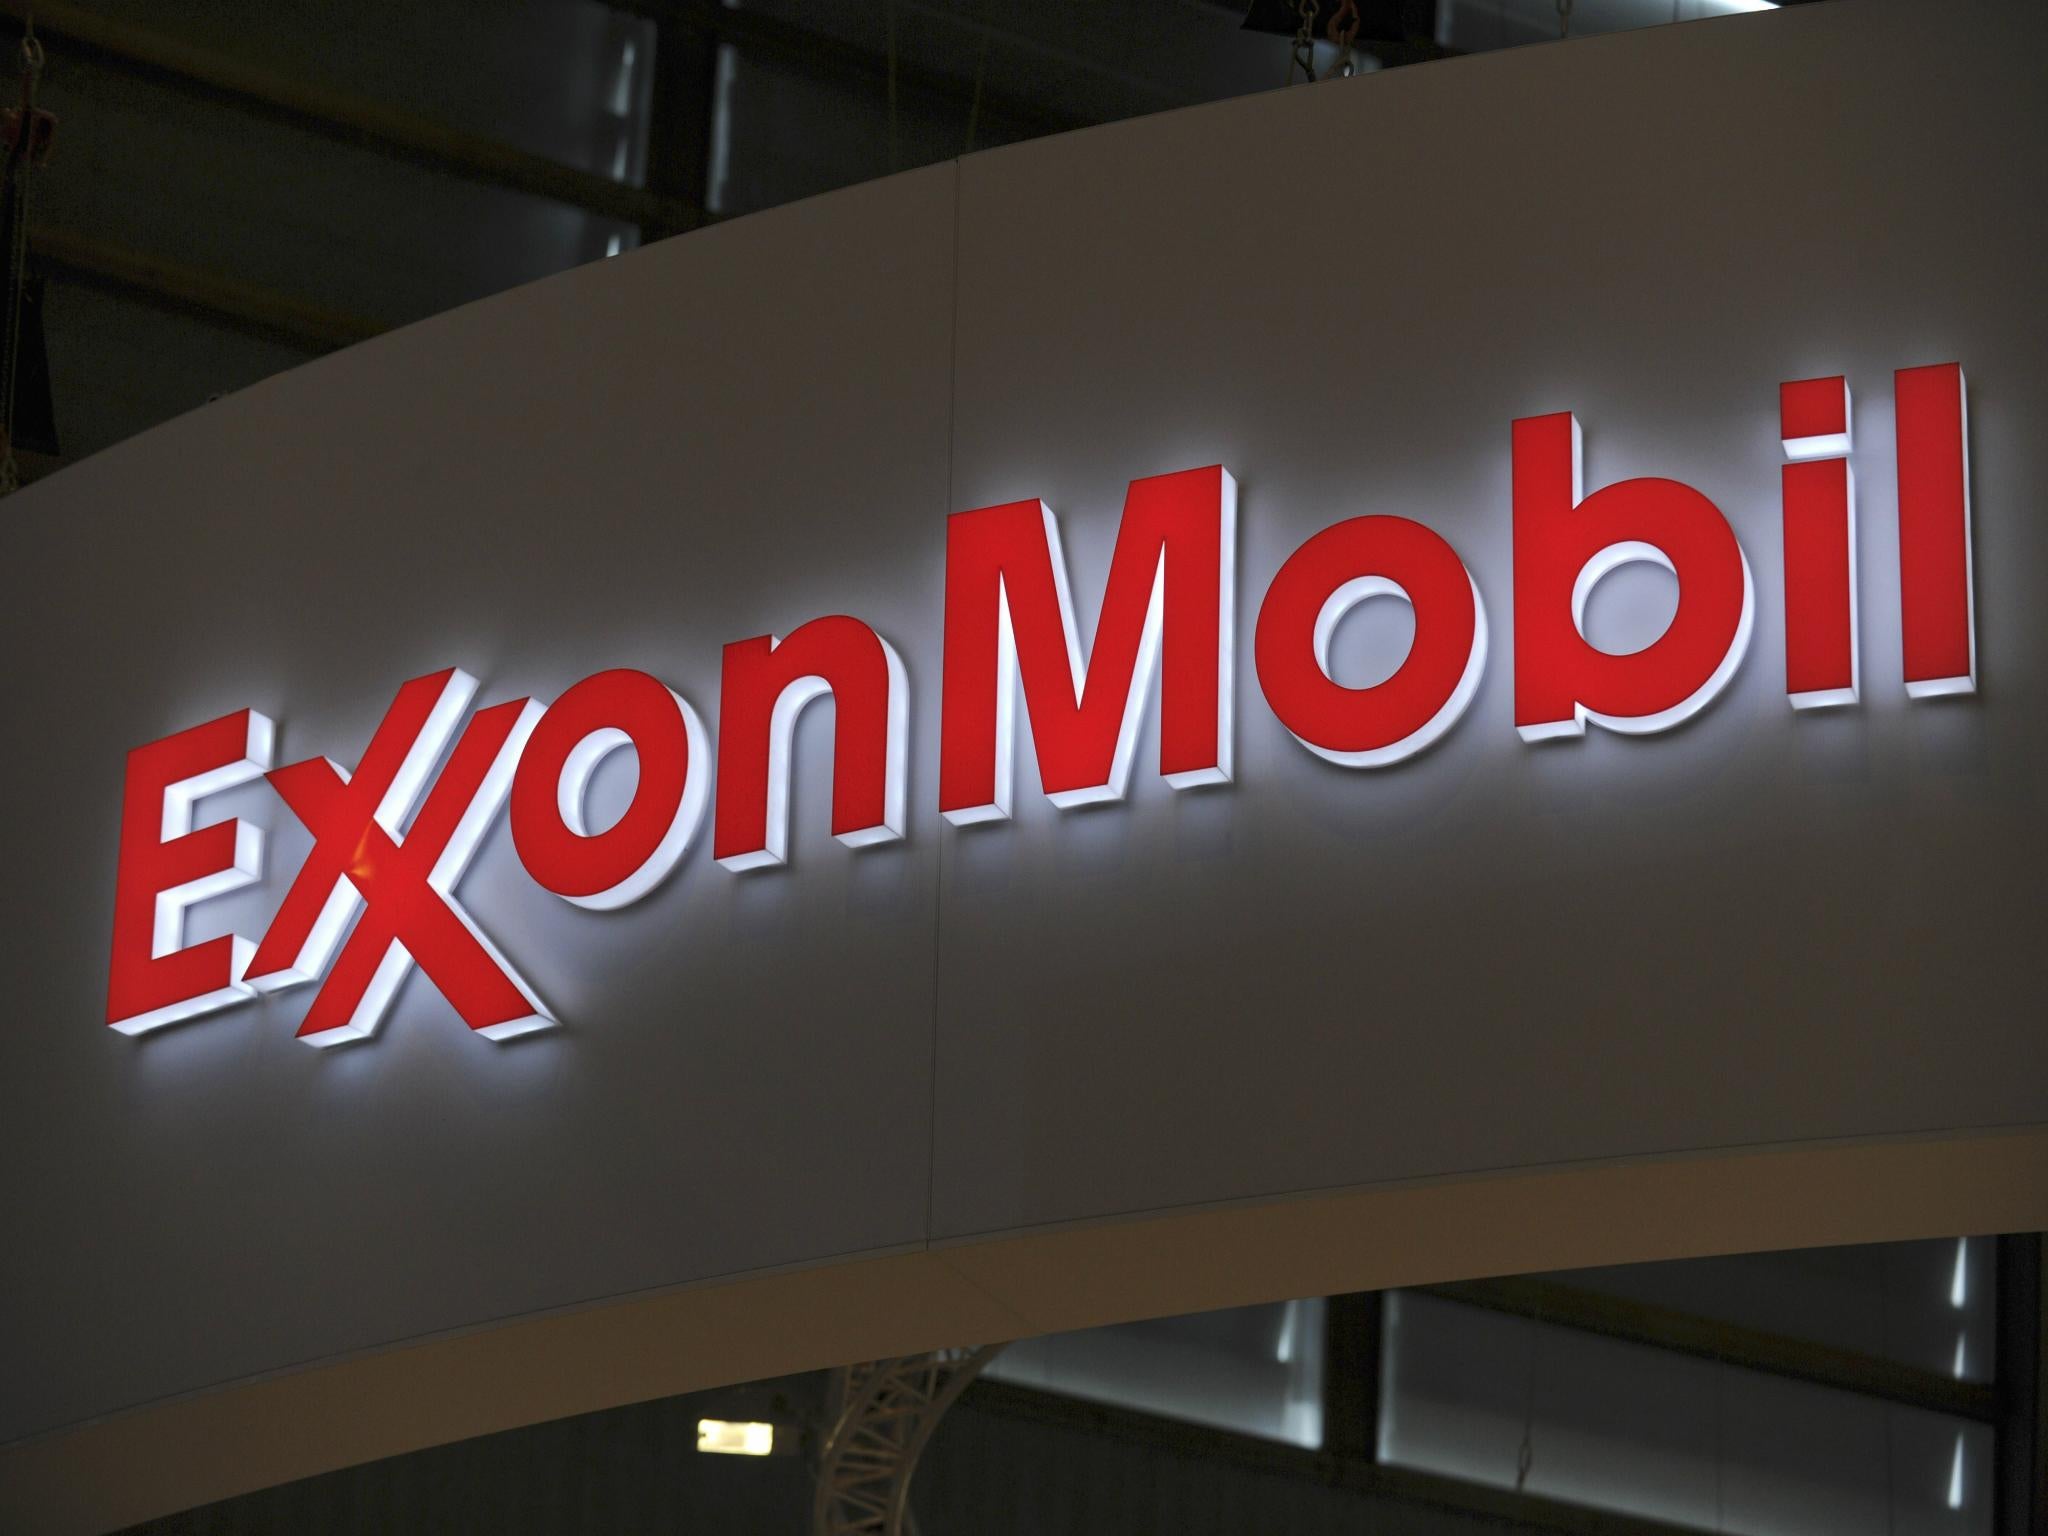 ExxonMobil is one of the world’s biggest companies